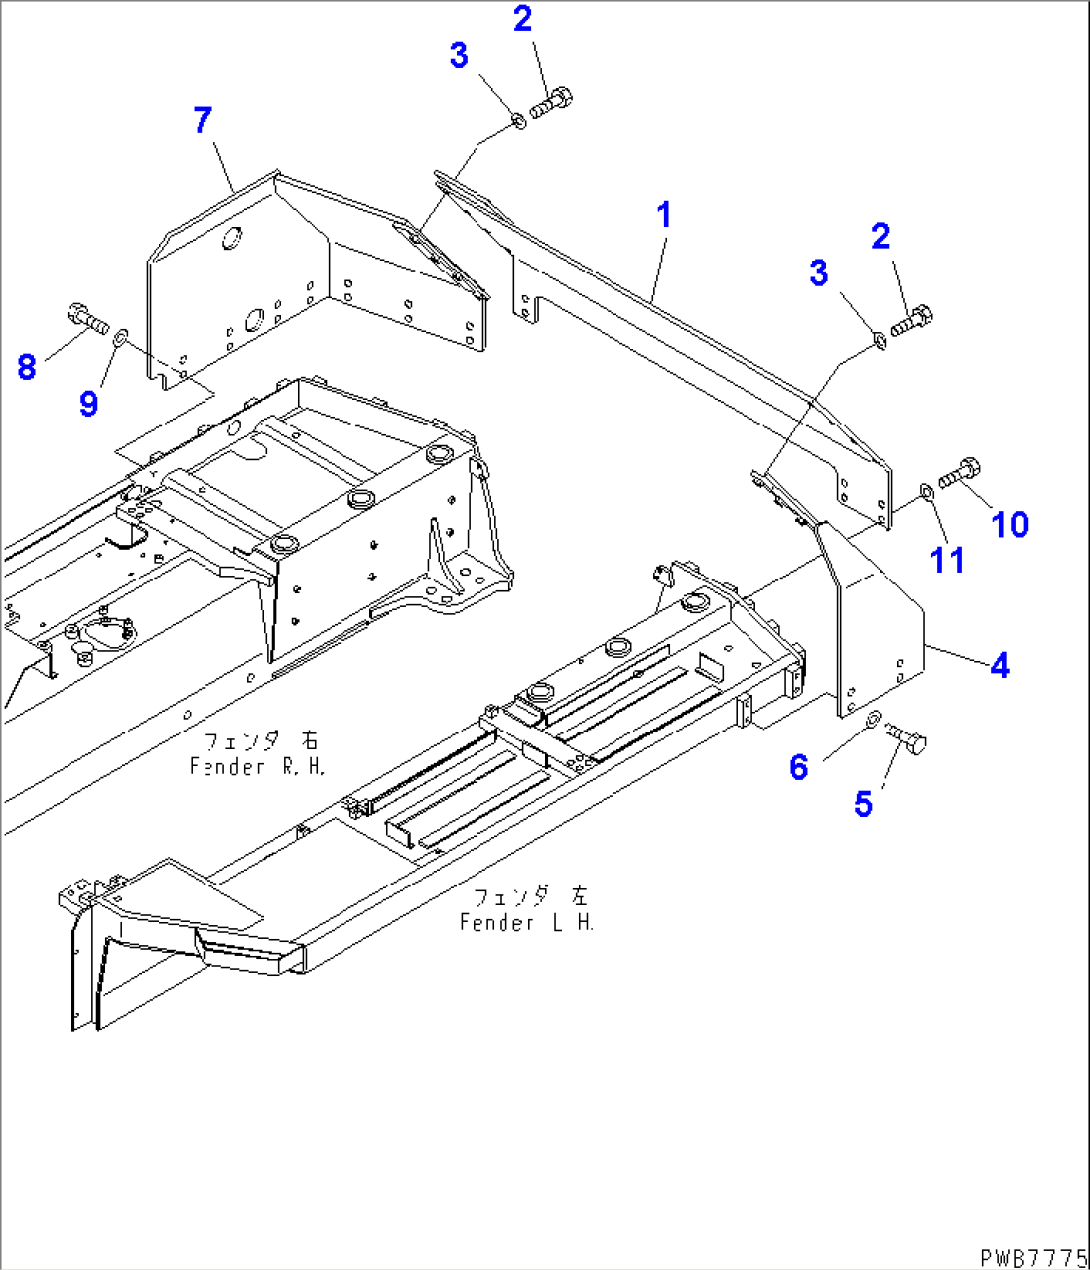 FUEL TANK AND HYDRAULIC TANK COVER (WITH SWEEPER)